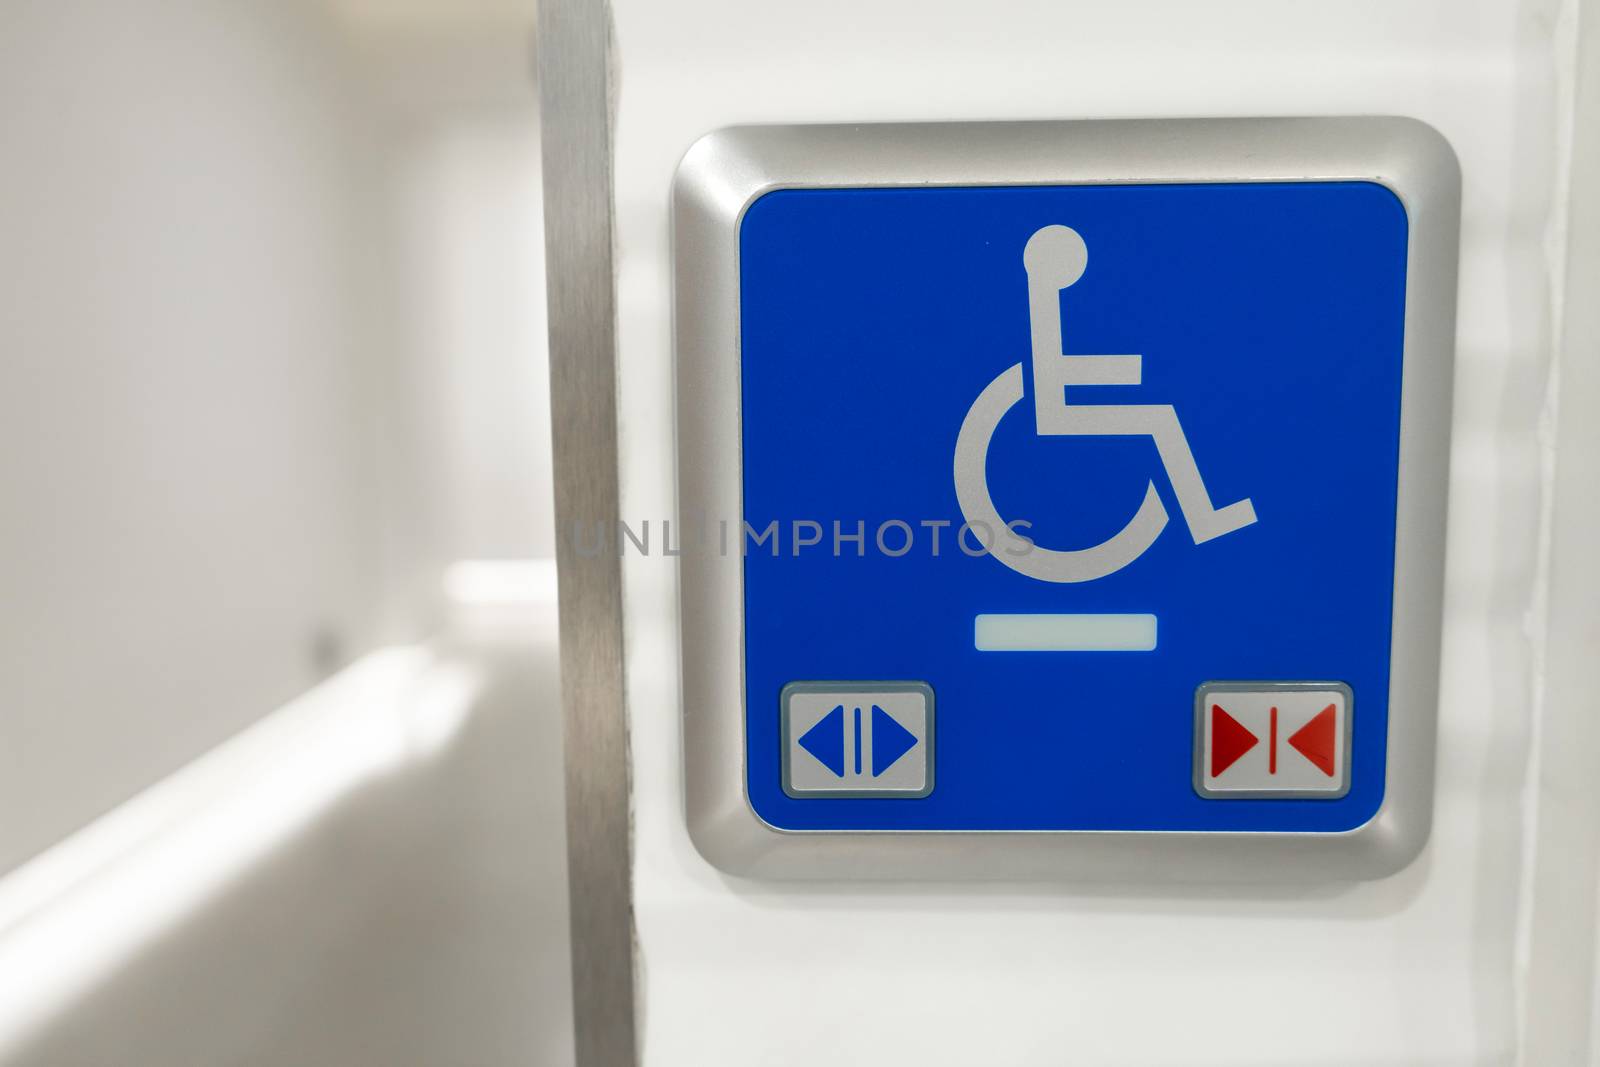 Restroom for people with disabilities in a modern country by Try_my_best